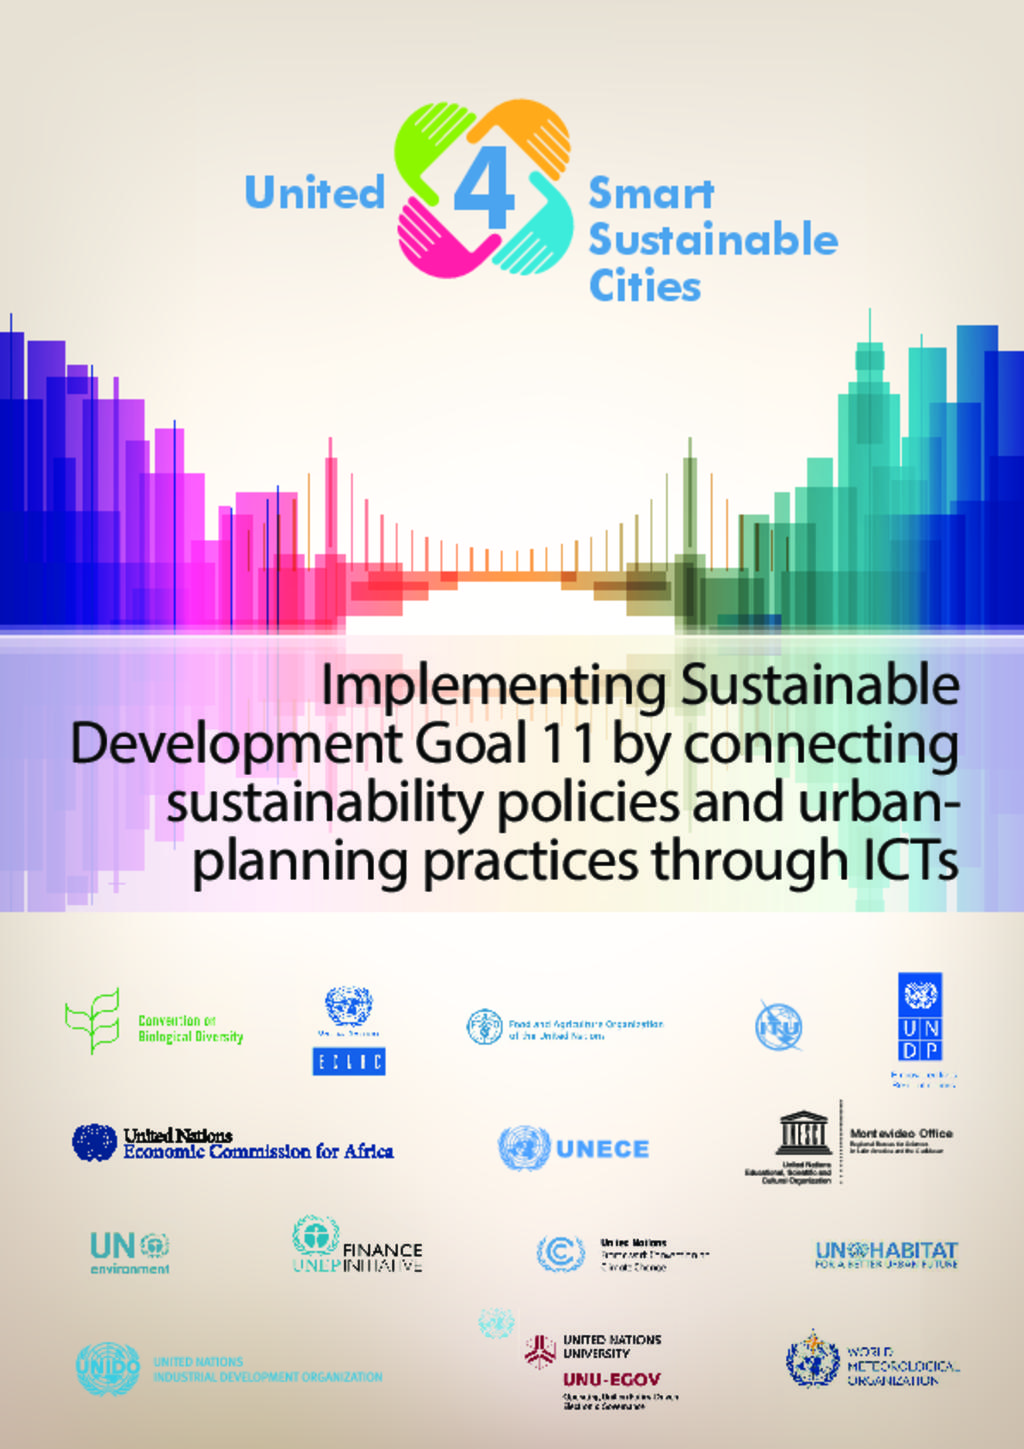 Sustainable Development and cities